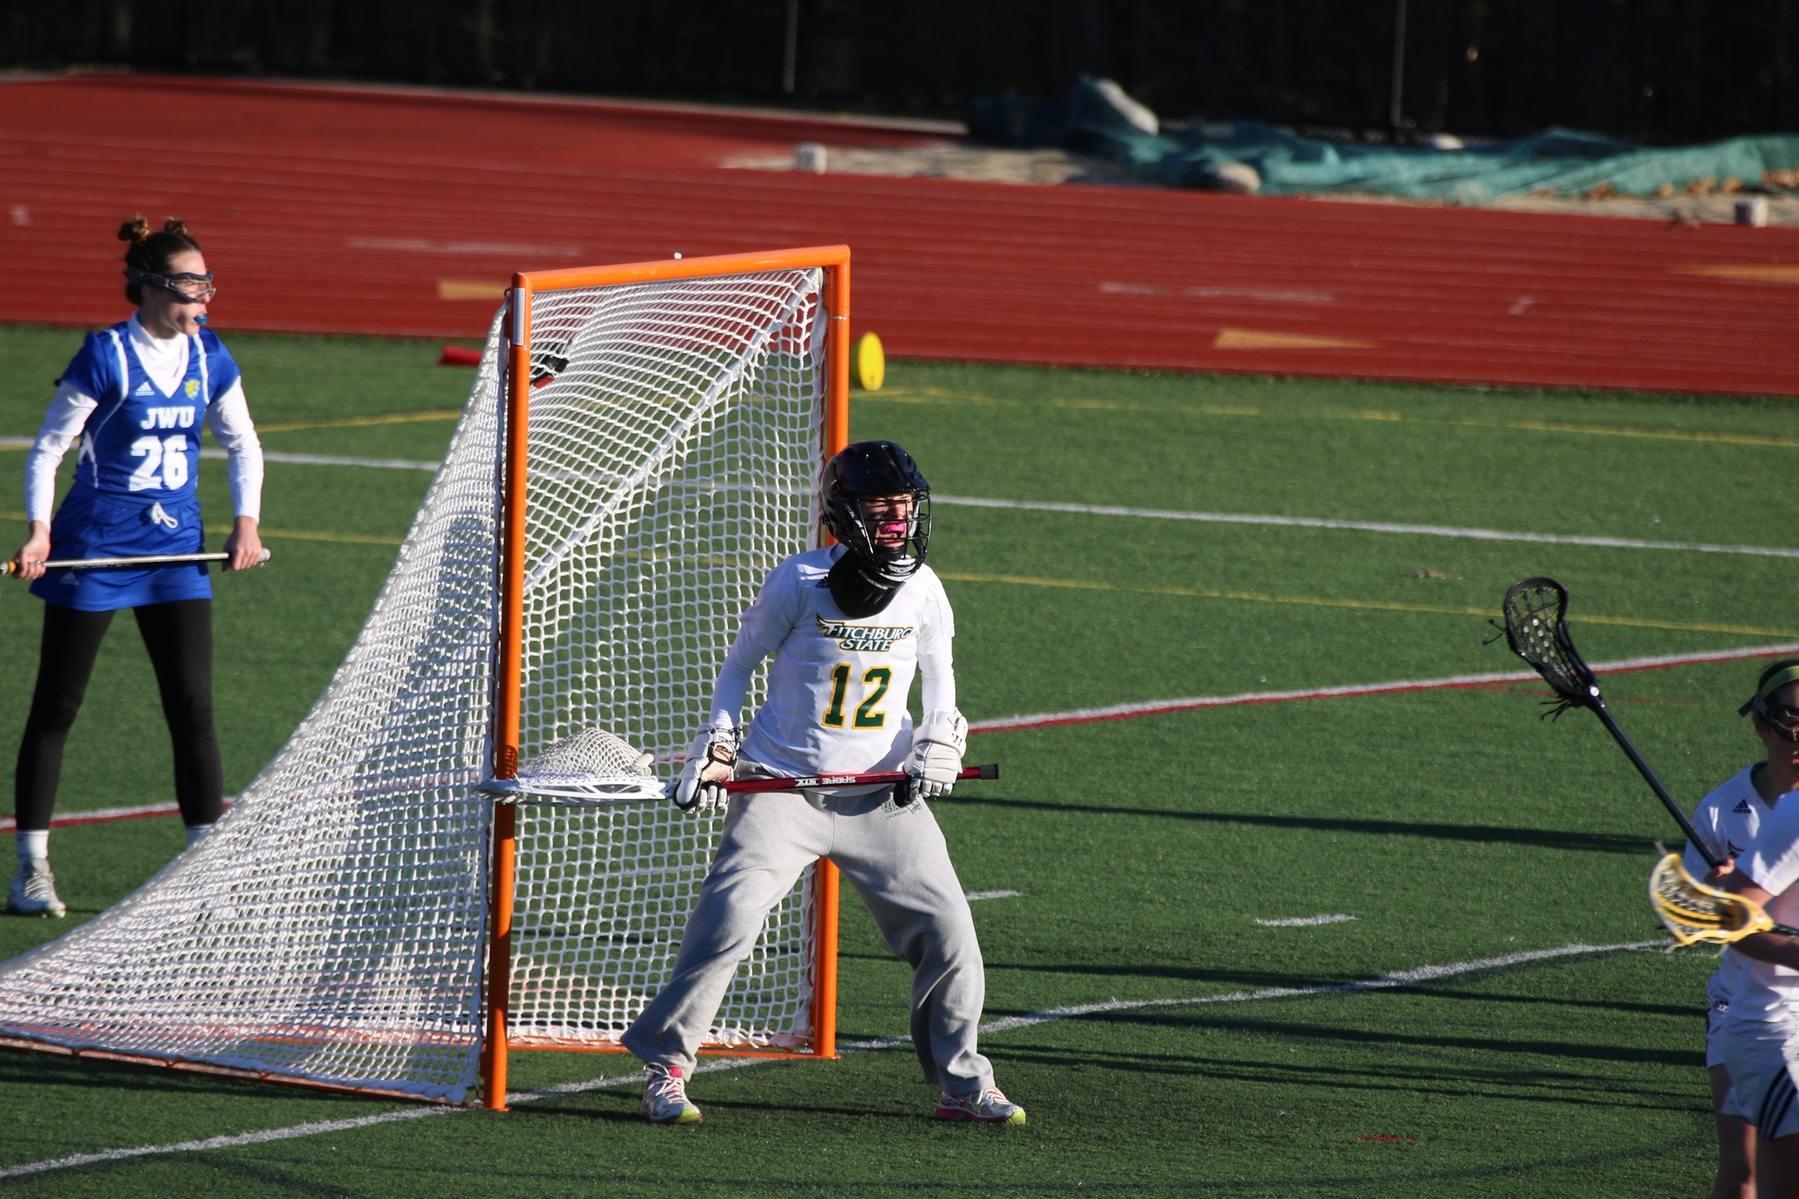 Fitchburg State Streaks Past Colby-Sawyer, 13-4